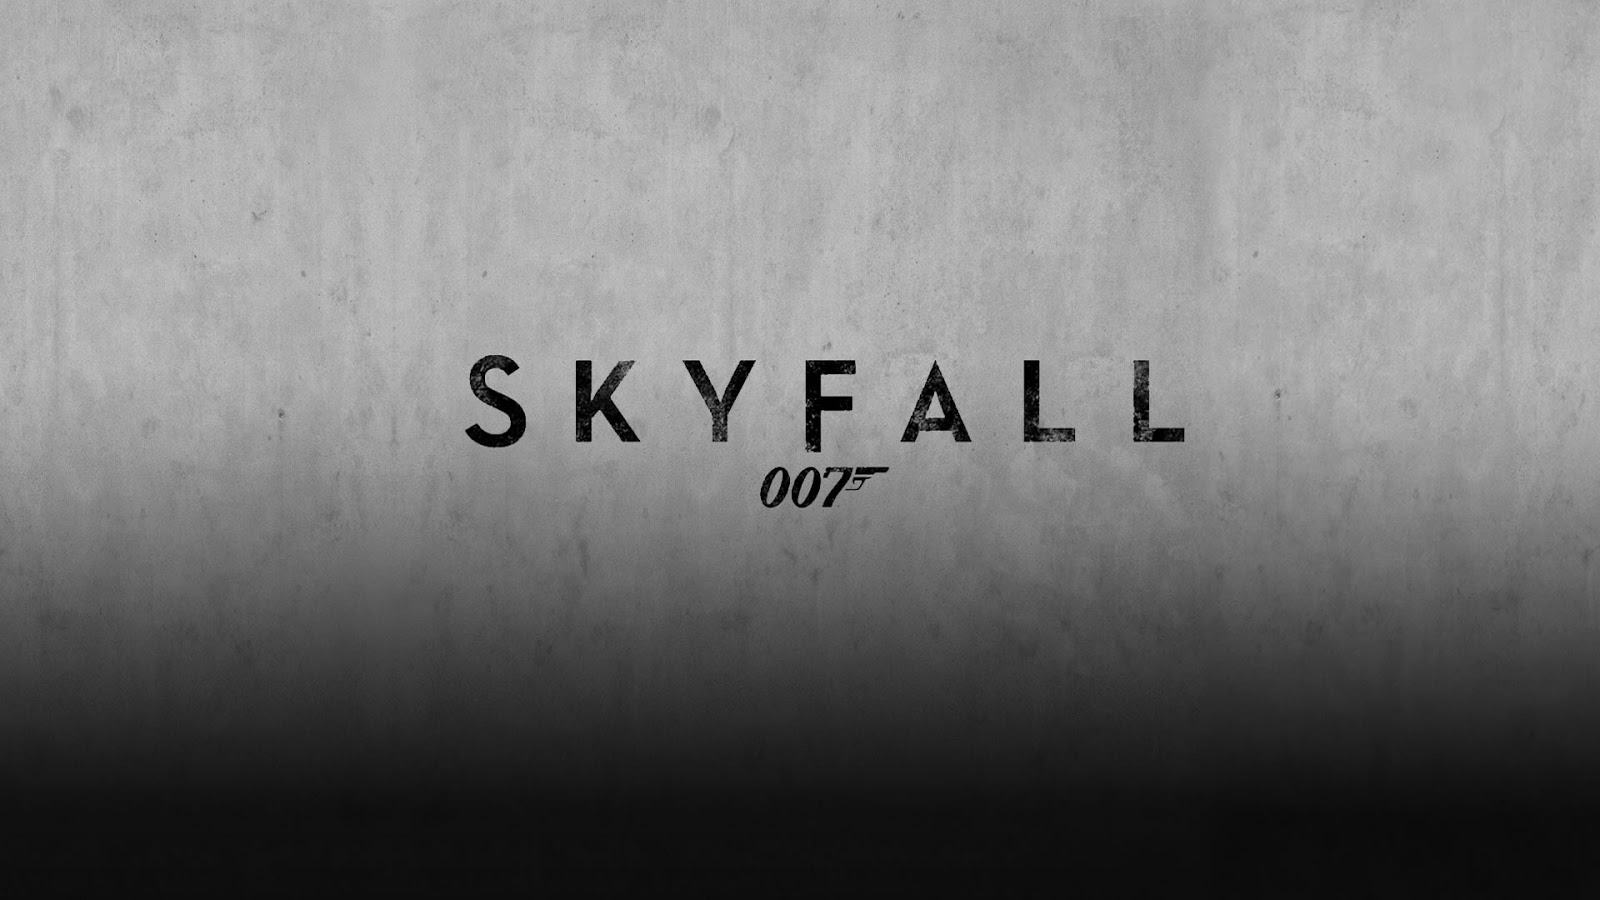 HD Wallpapers for iPhone 5 - James Bond 007 Skyfall Wallpapers ...